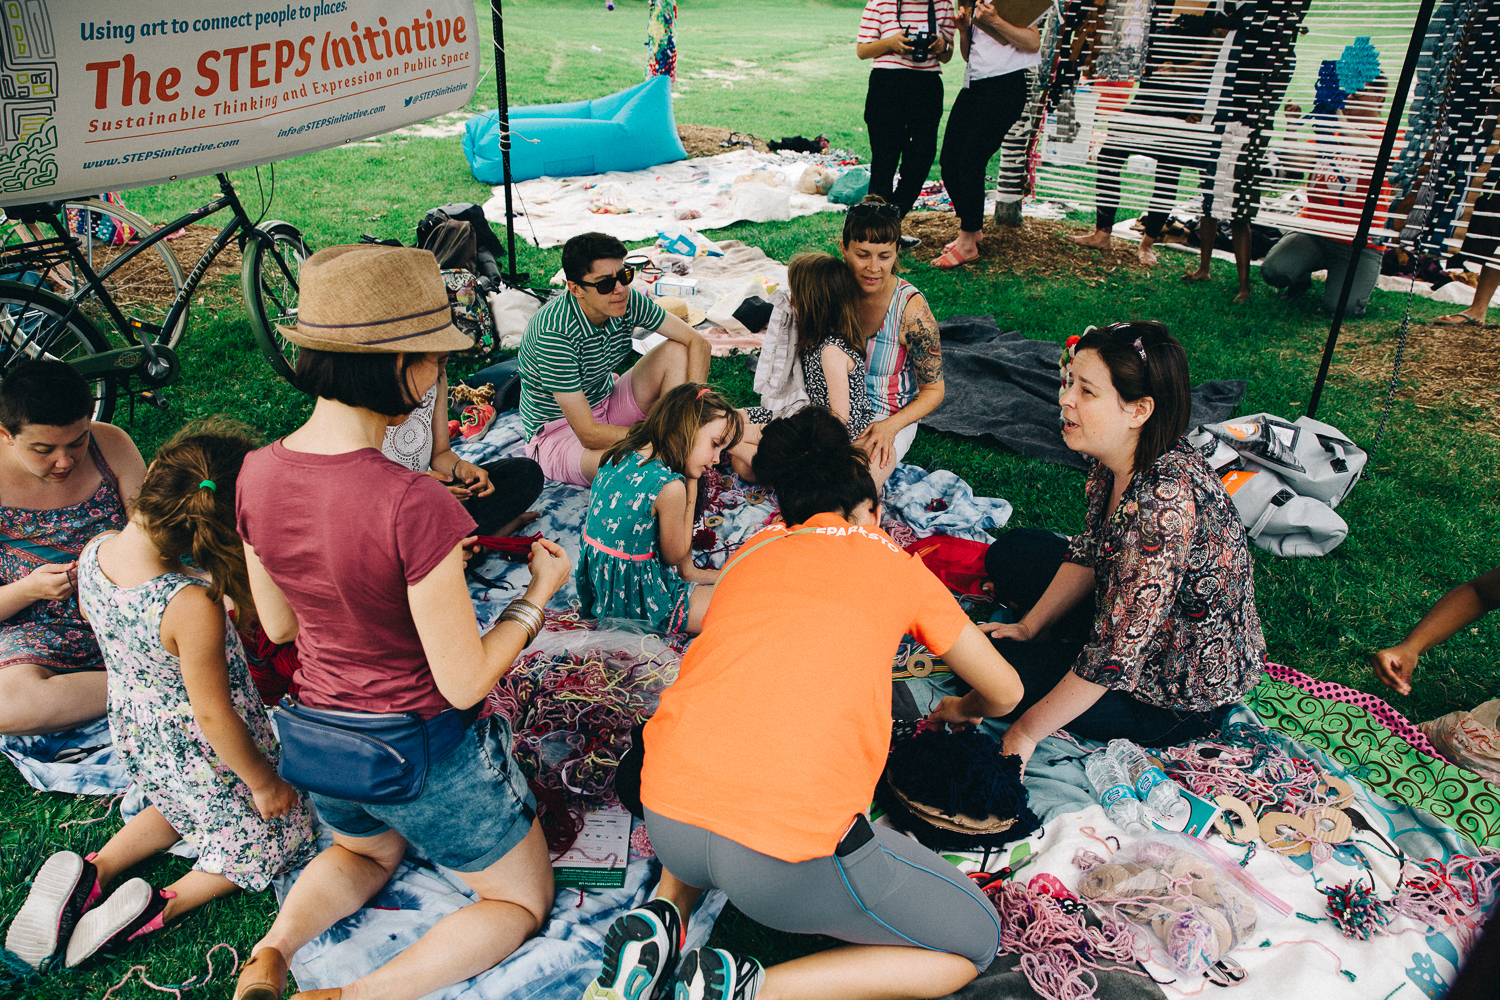 A group of adults and children sitting on blankets under a tree doing crafts together.